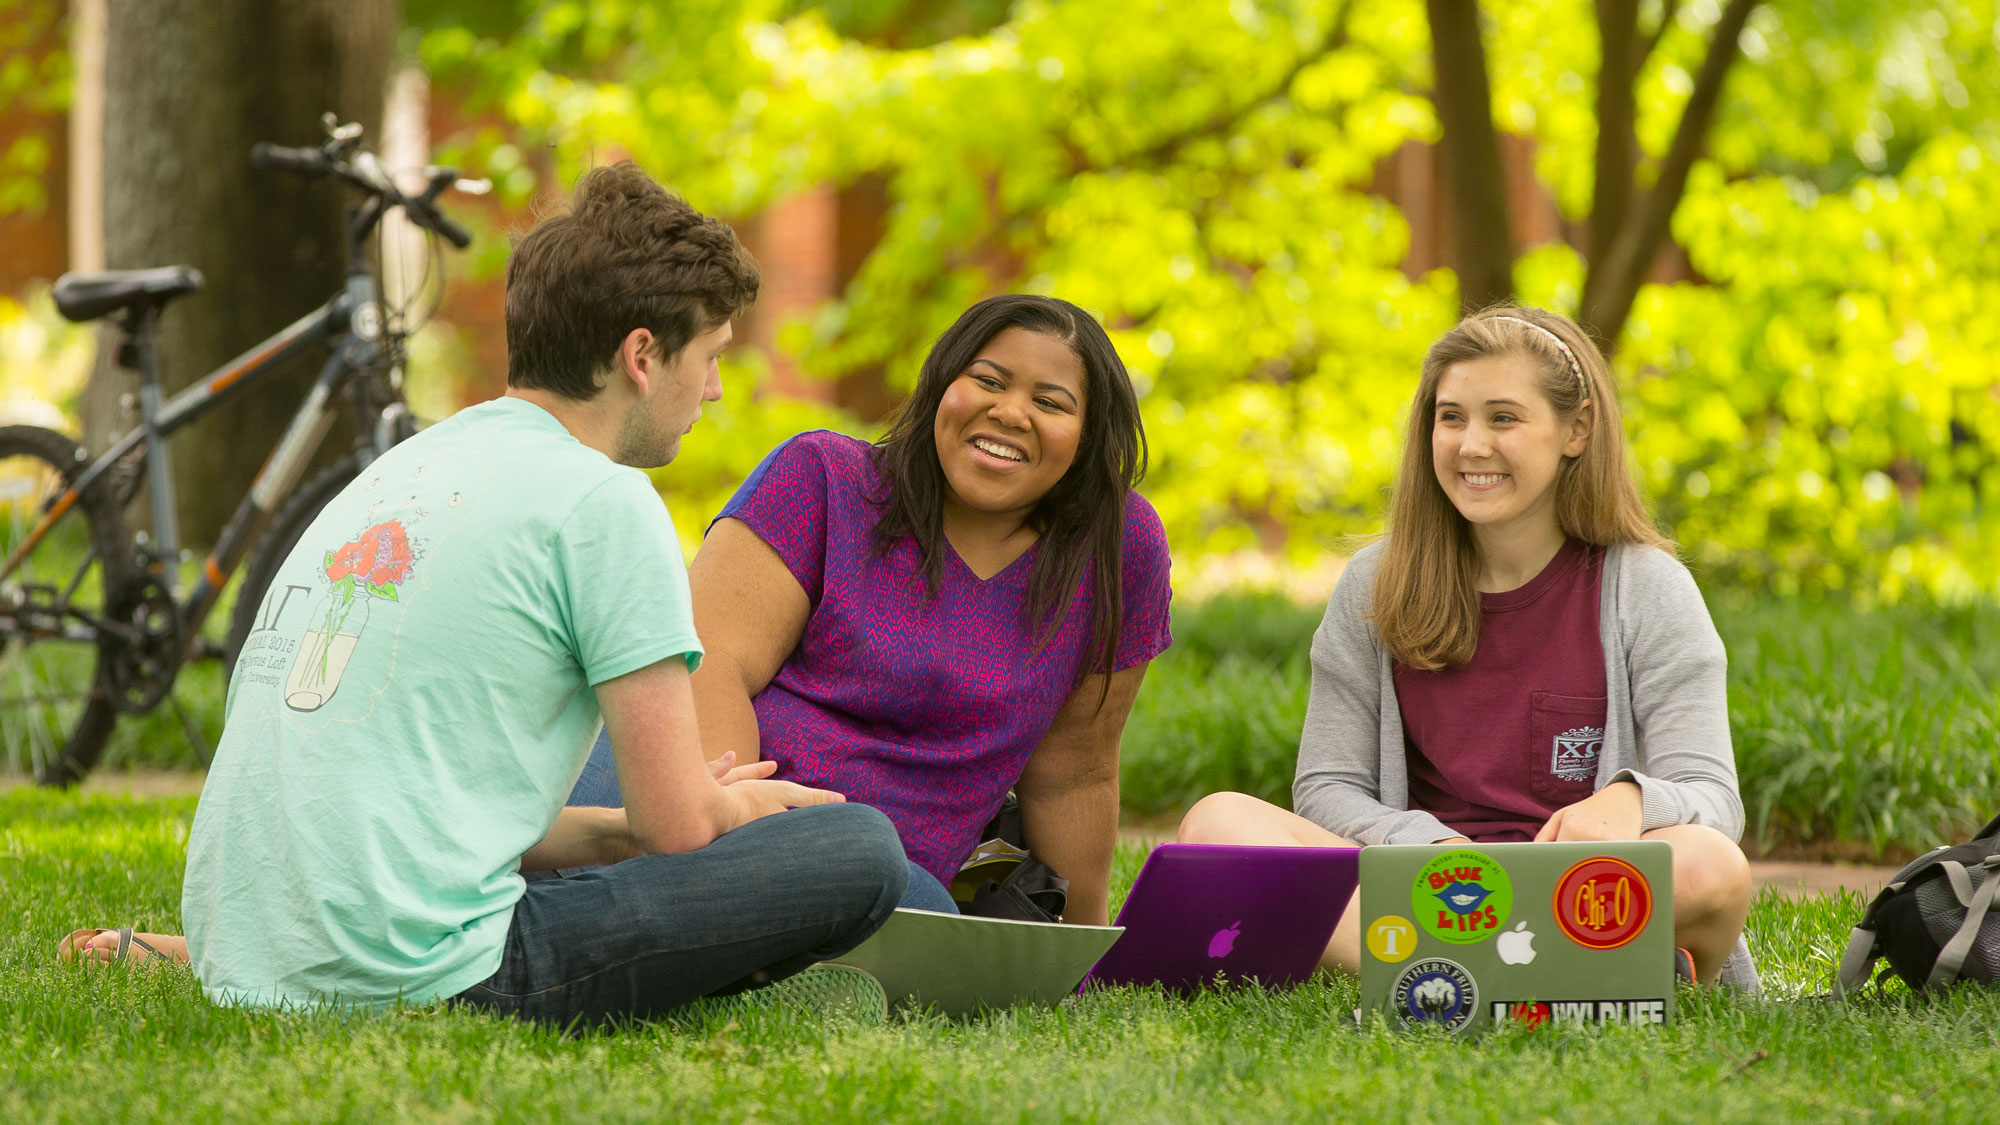 Students sitting outside in the grass with laptops